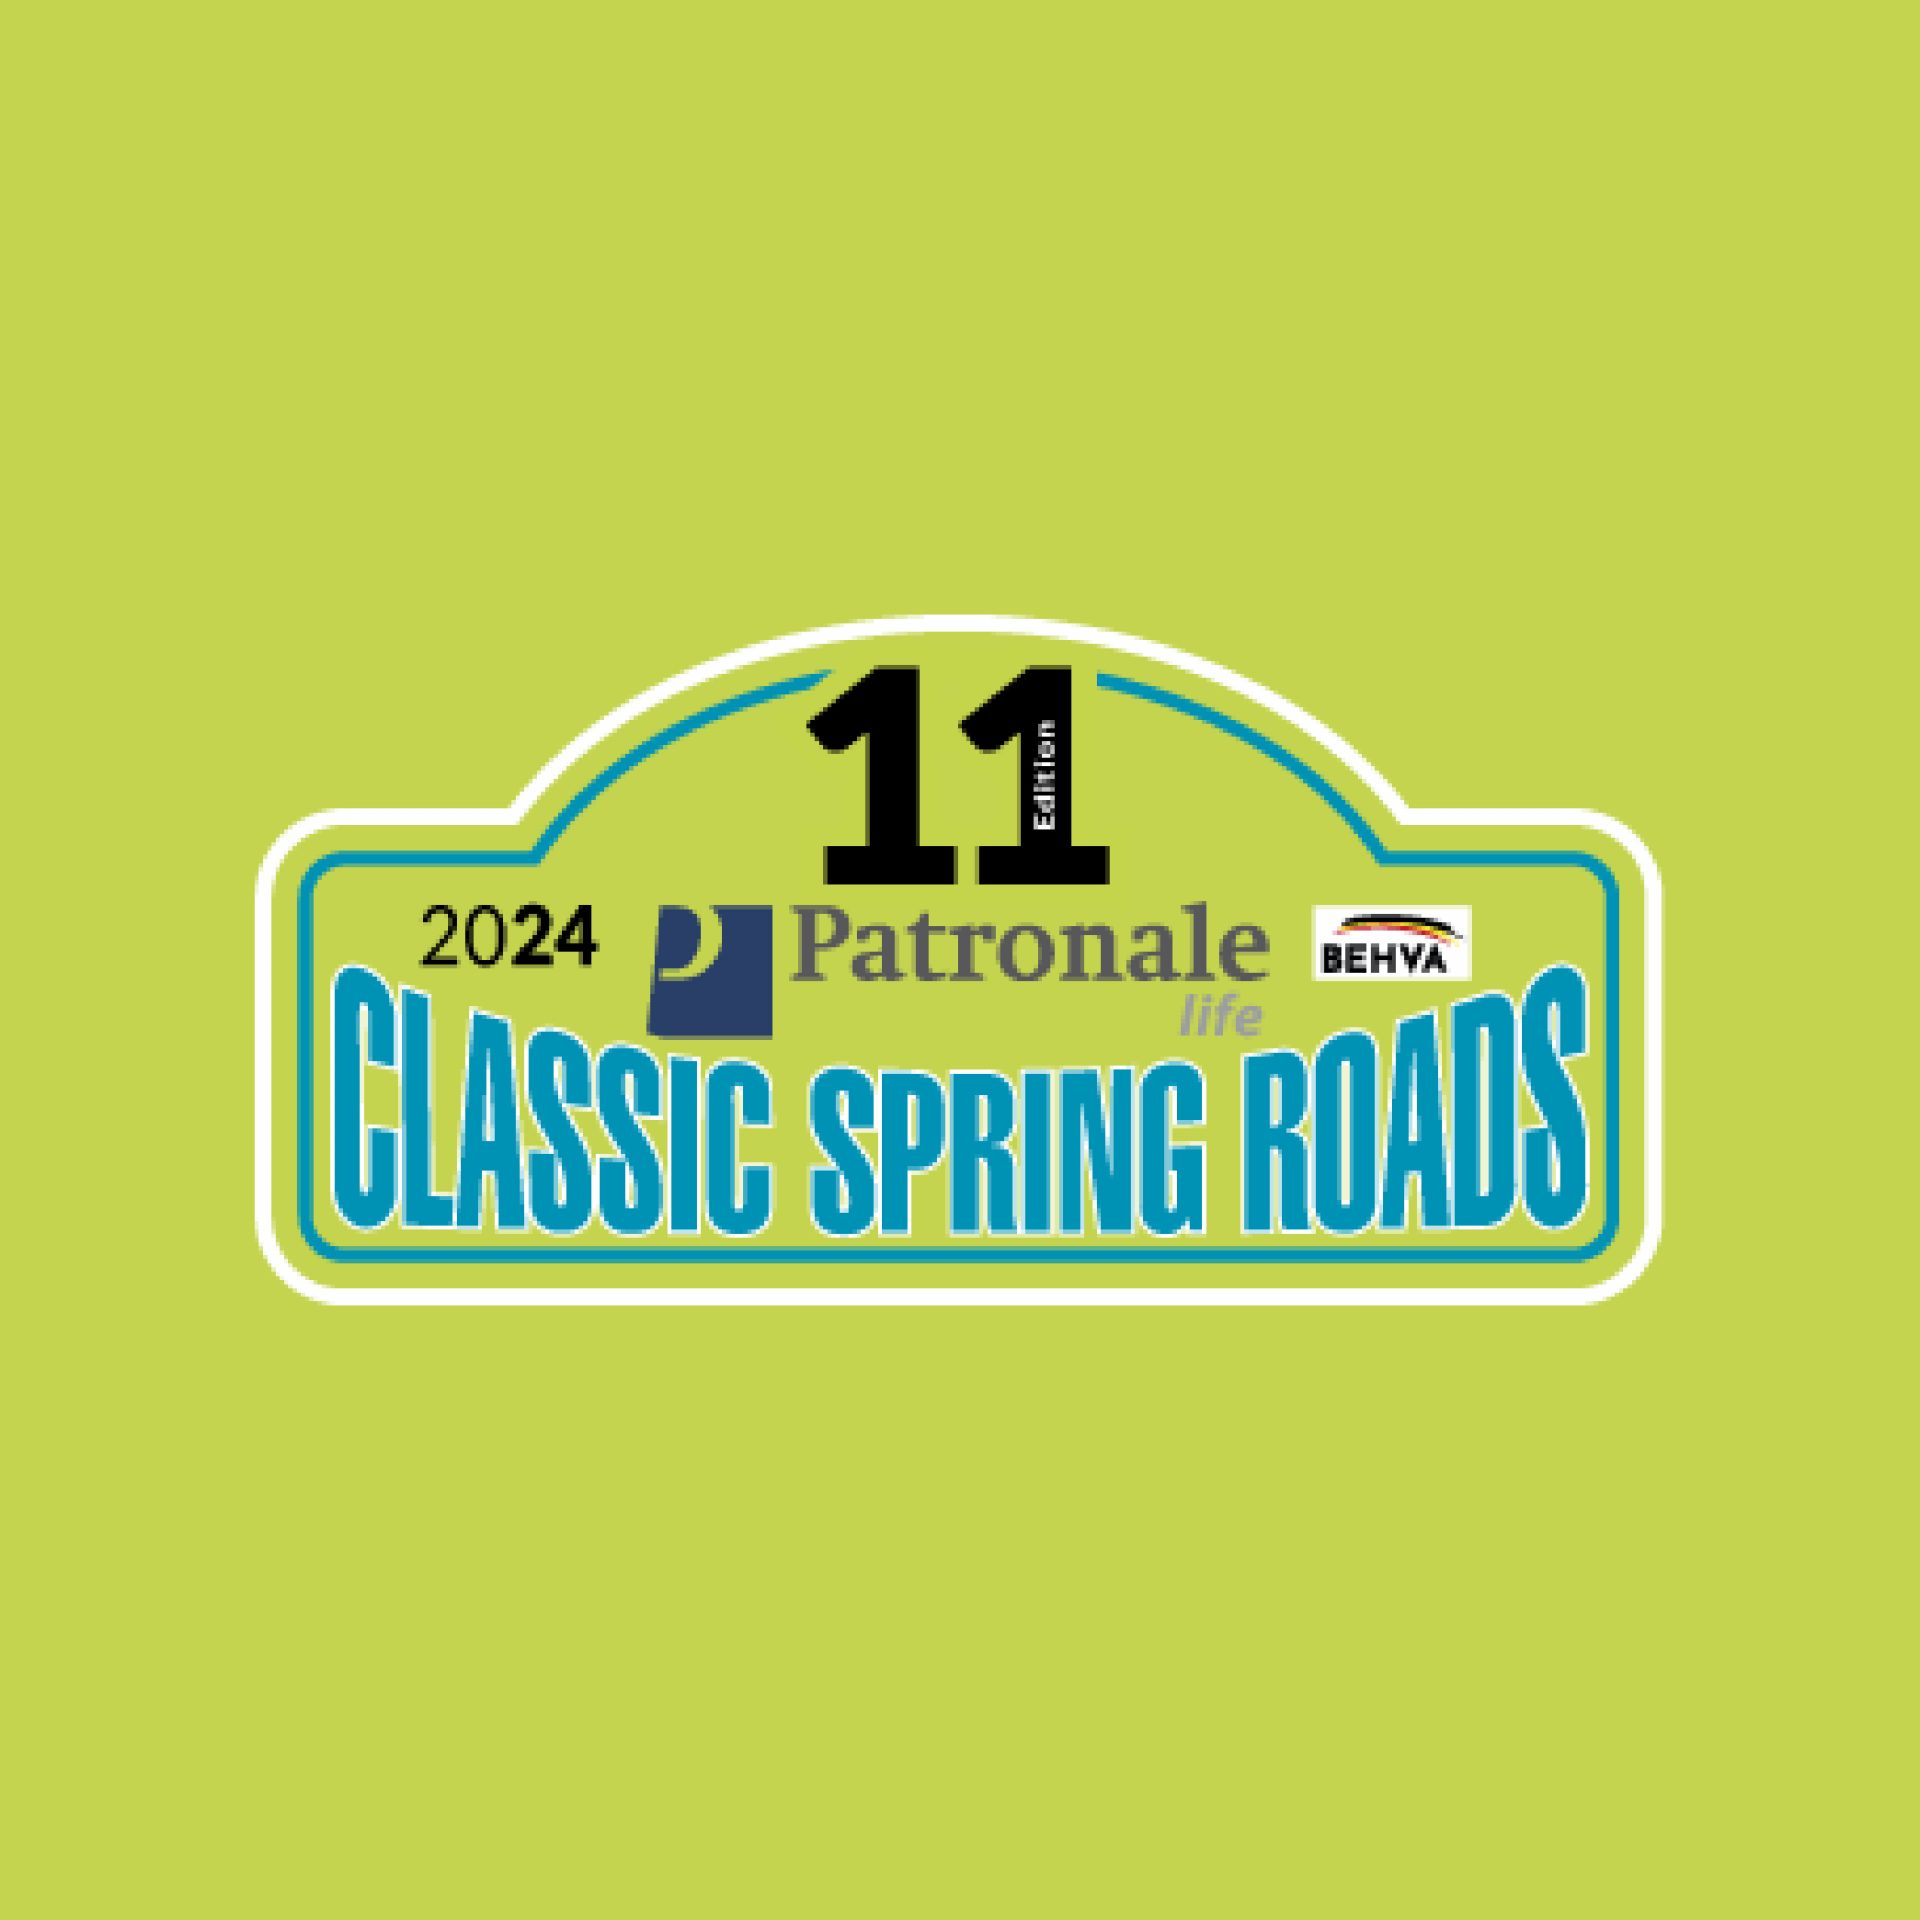 Patronale Life Classic Spring Roads